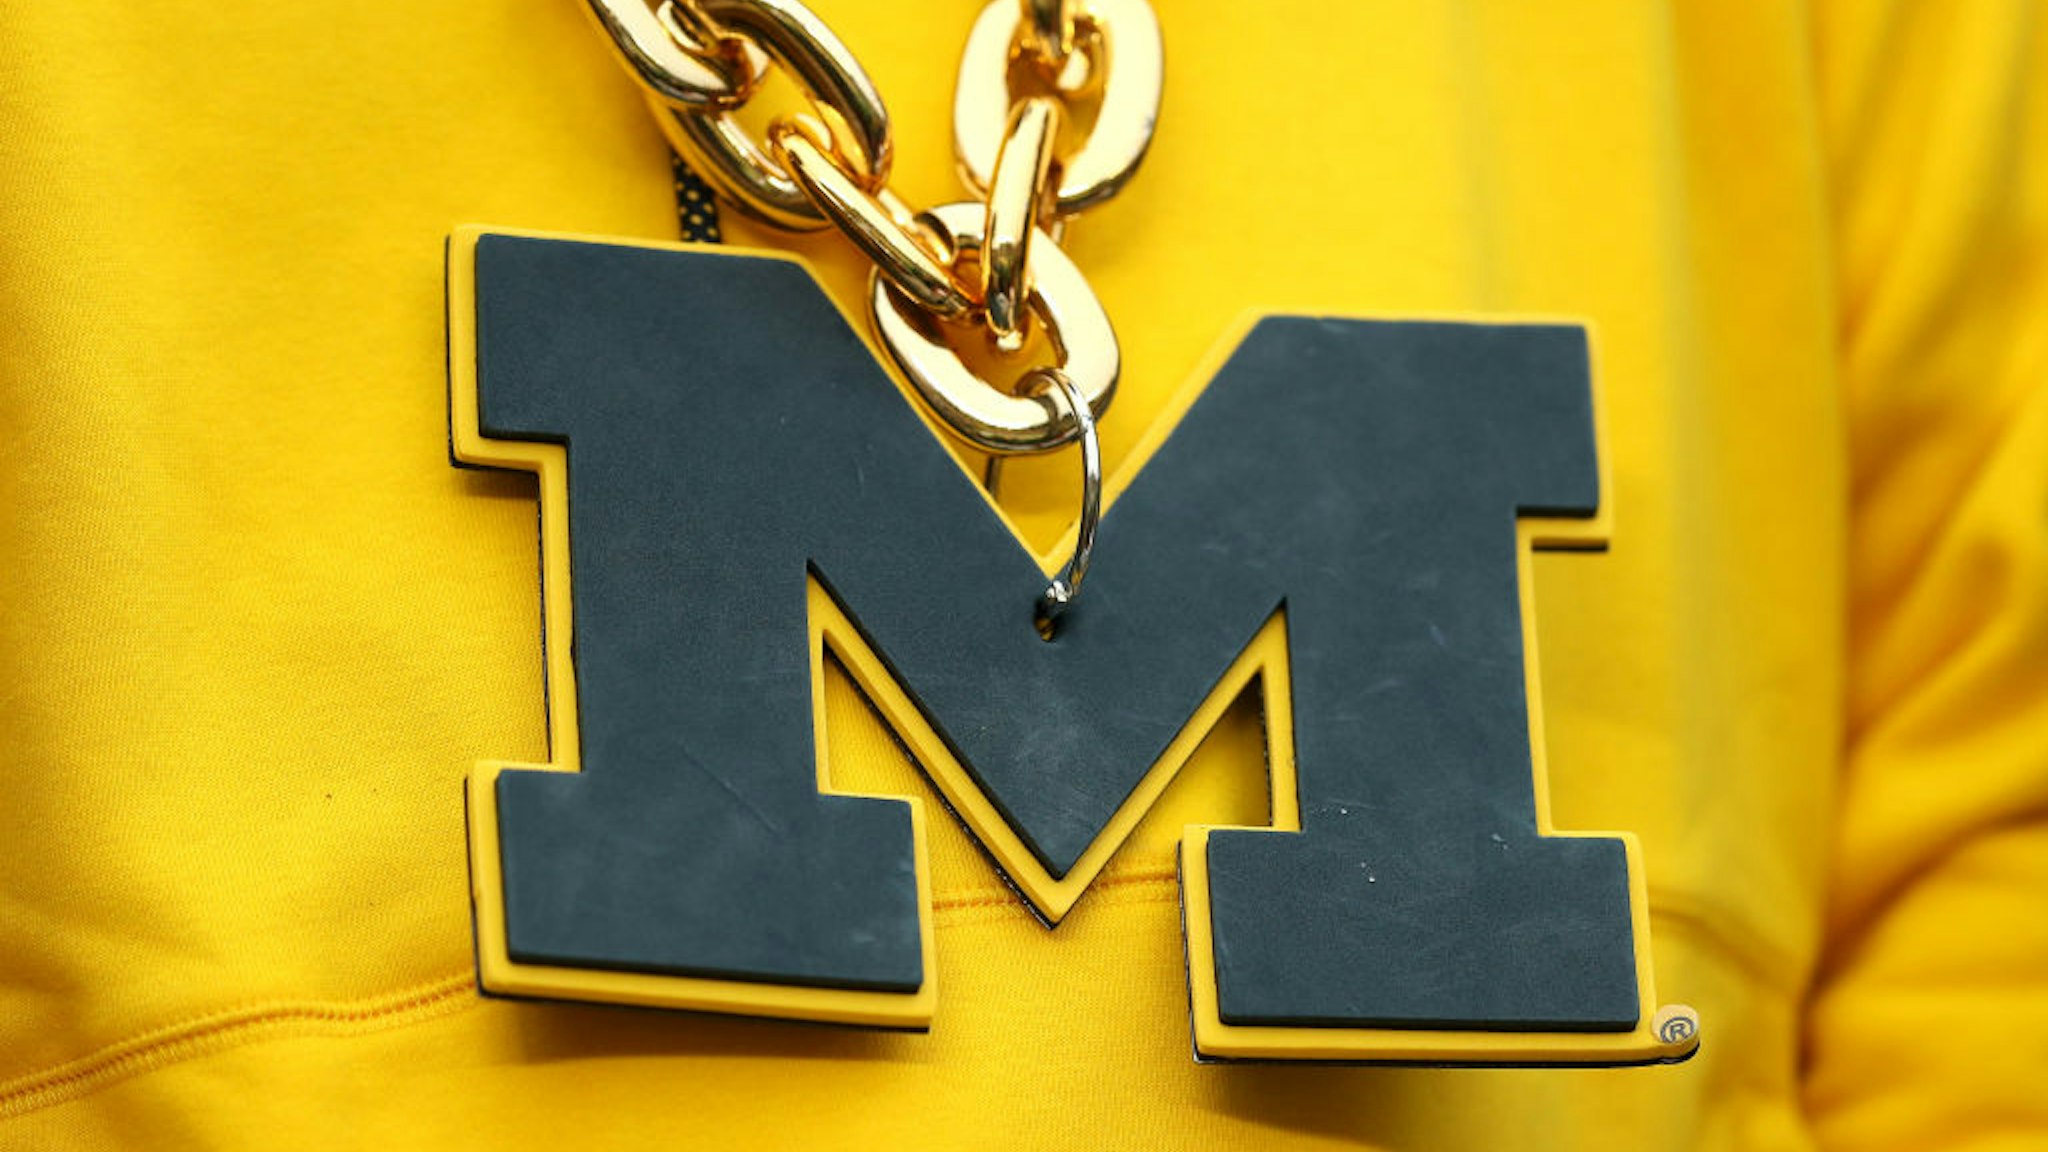 ANN ARBOR, MICHIGAN - NOVEMBER 27: Detail of a Michigan Wolverines necklace during the game against the Ohio State Buckeyes at Michigan Stadium on November 27, 2021 in Ann Arbor, Michigan. (Photo by Mike Mulholland/Getty Images)